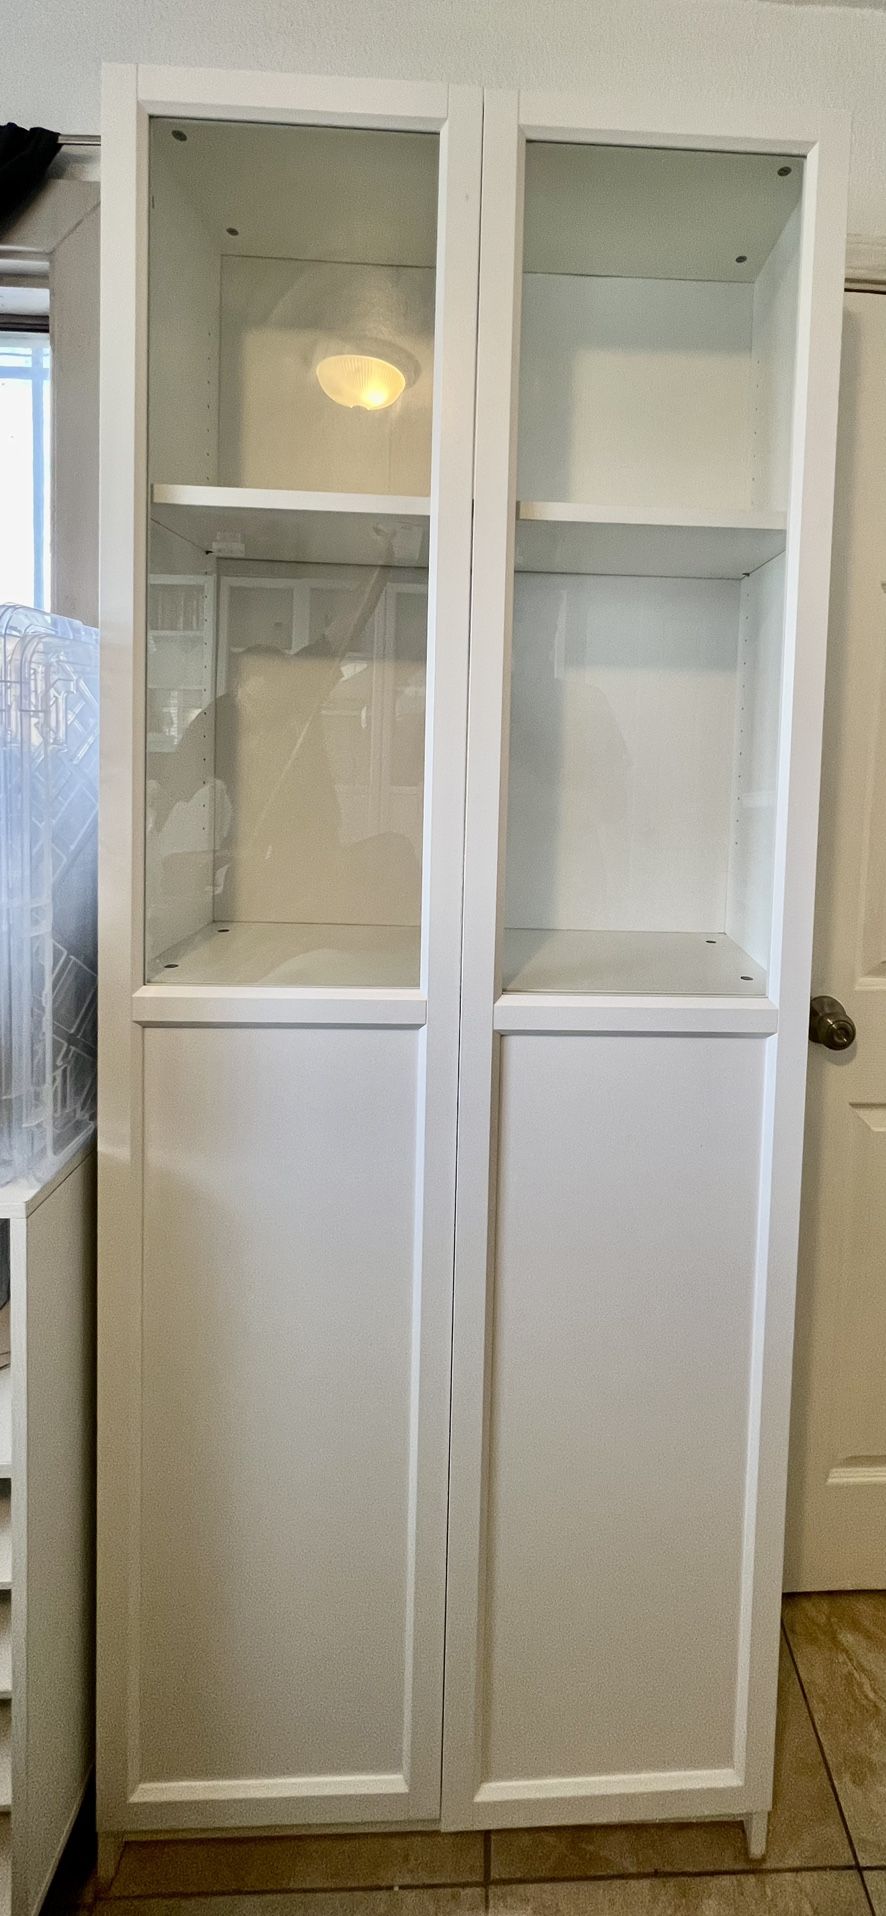 4 White Bookcases For Sale ($149 each)